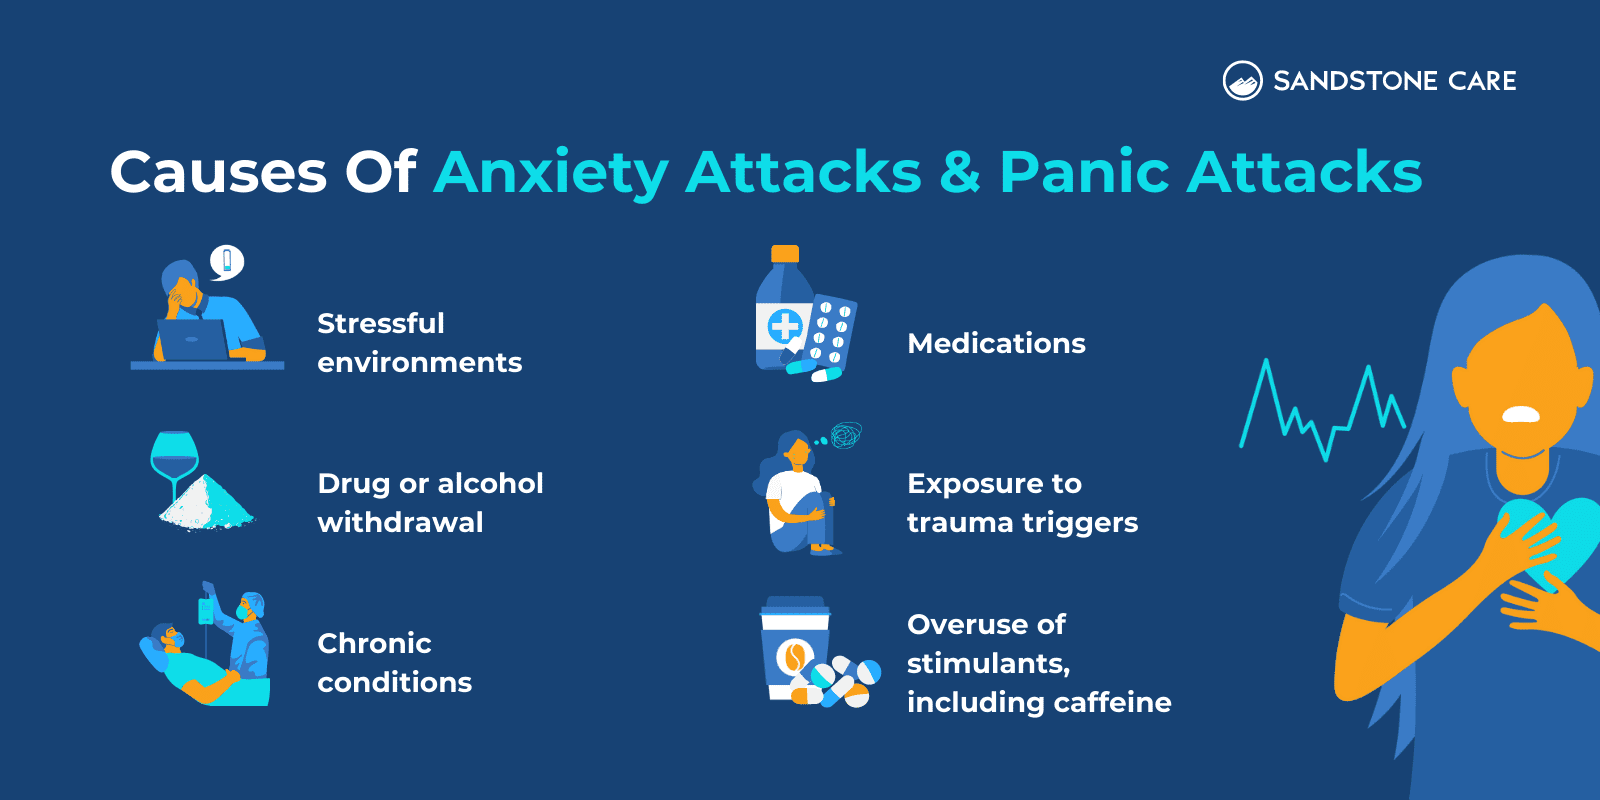 "Causes Of Anxiety Attacks & Panic Attacks" listed with relevant graphics and digital illustrations